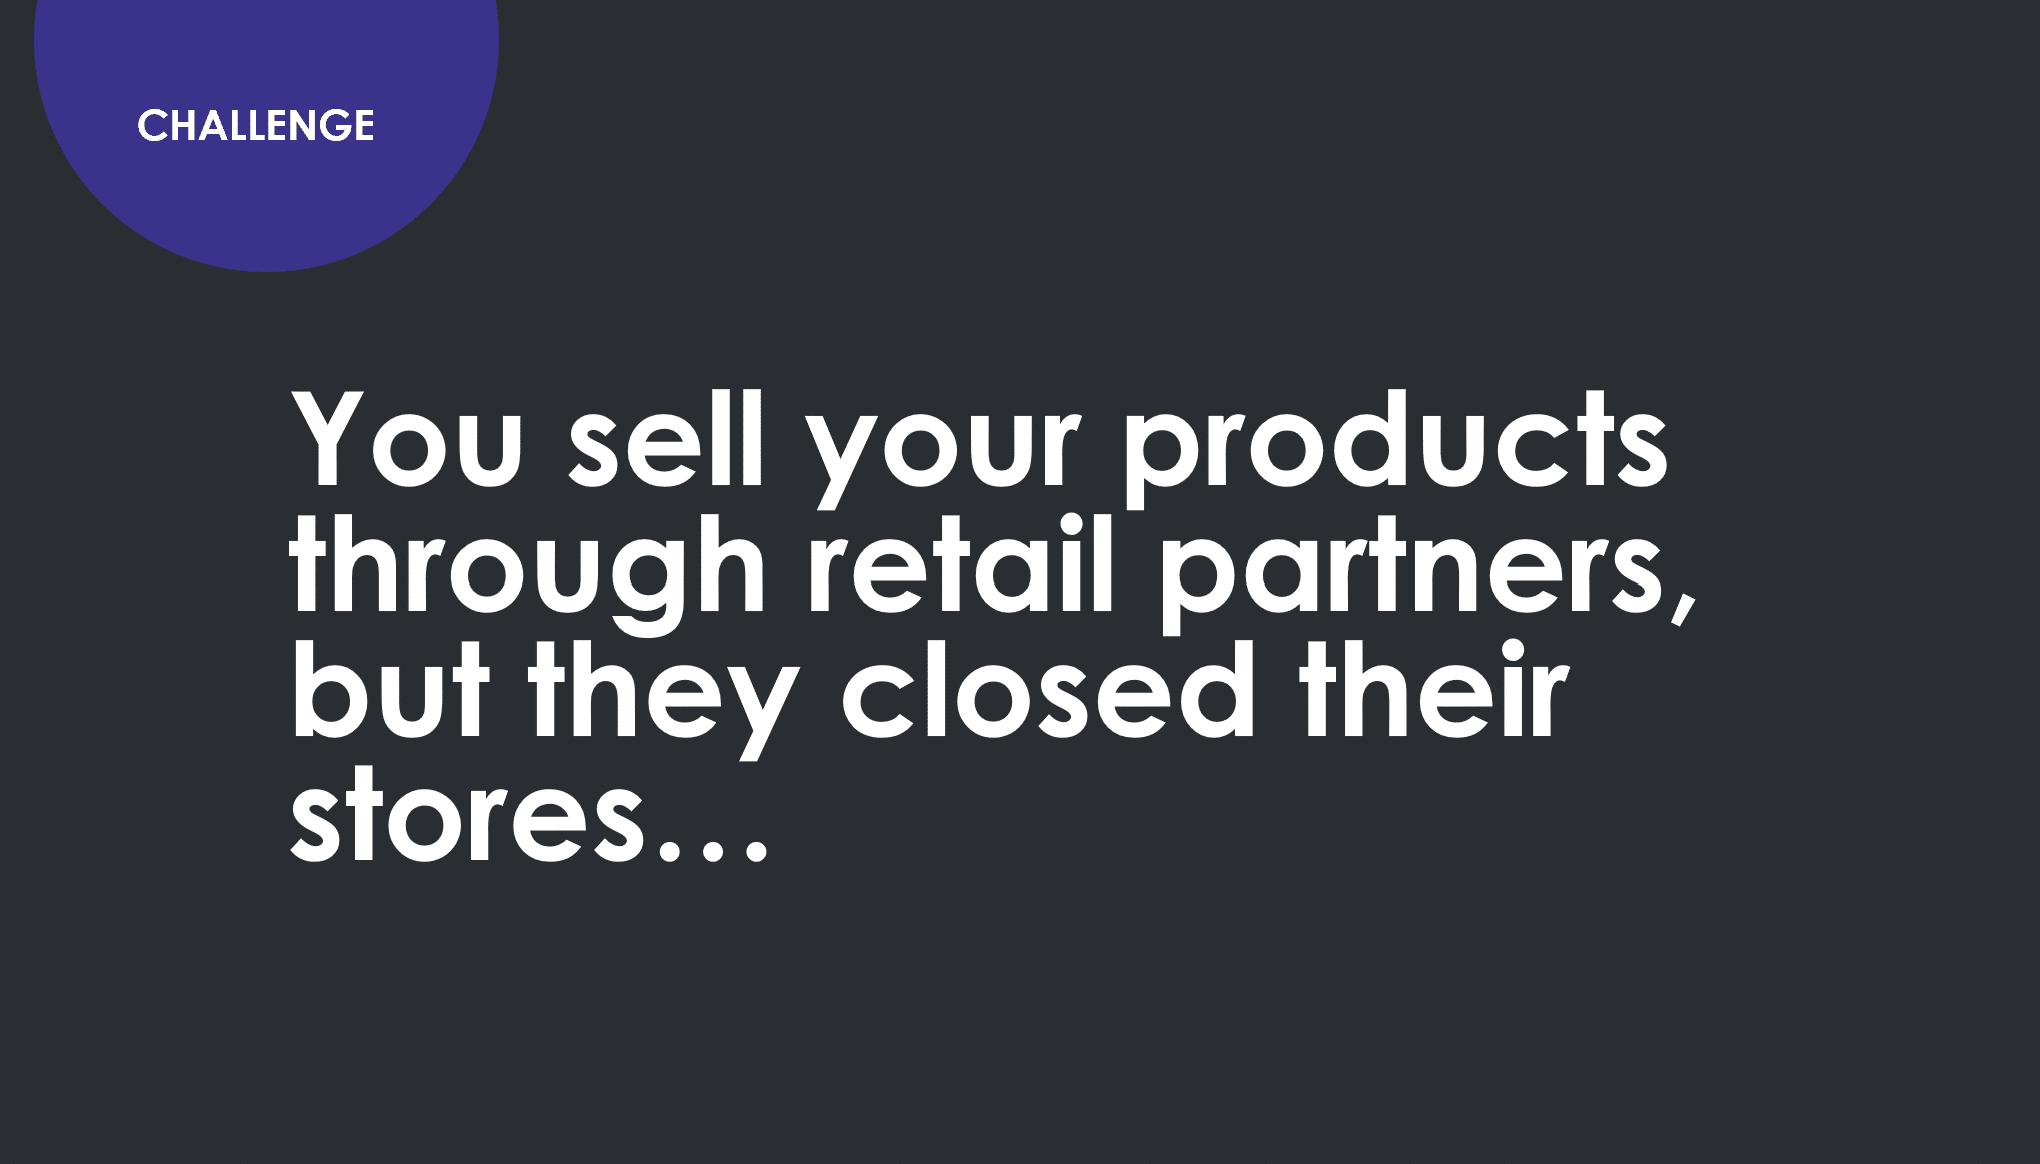 Challenge. You sell your products through retail partners but they closed their stores.